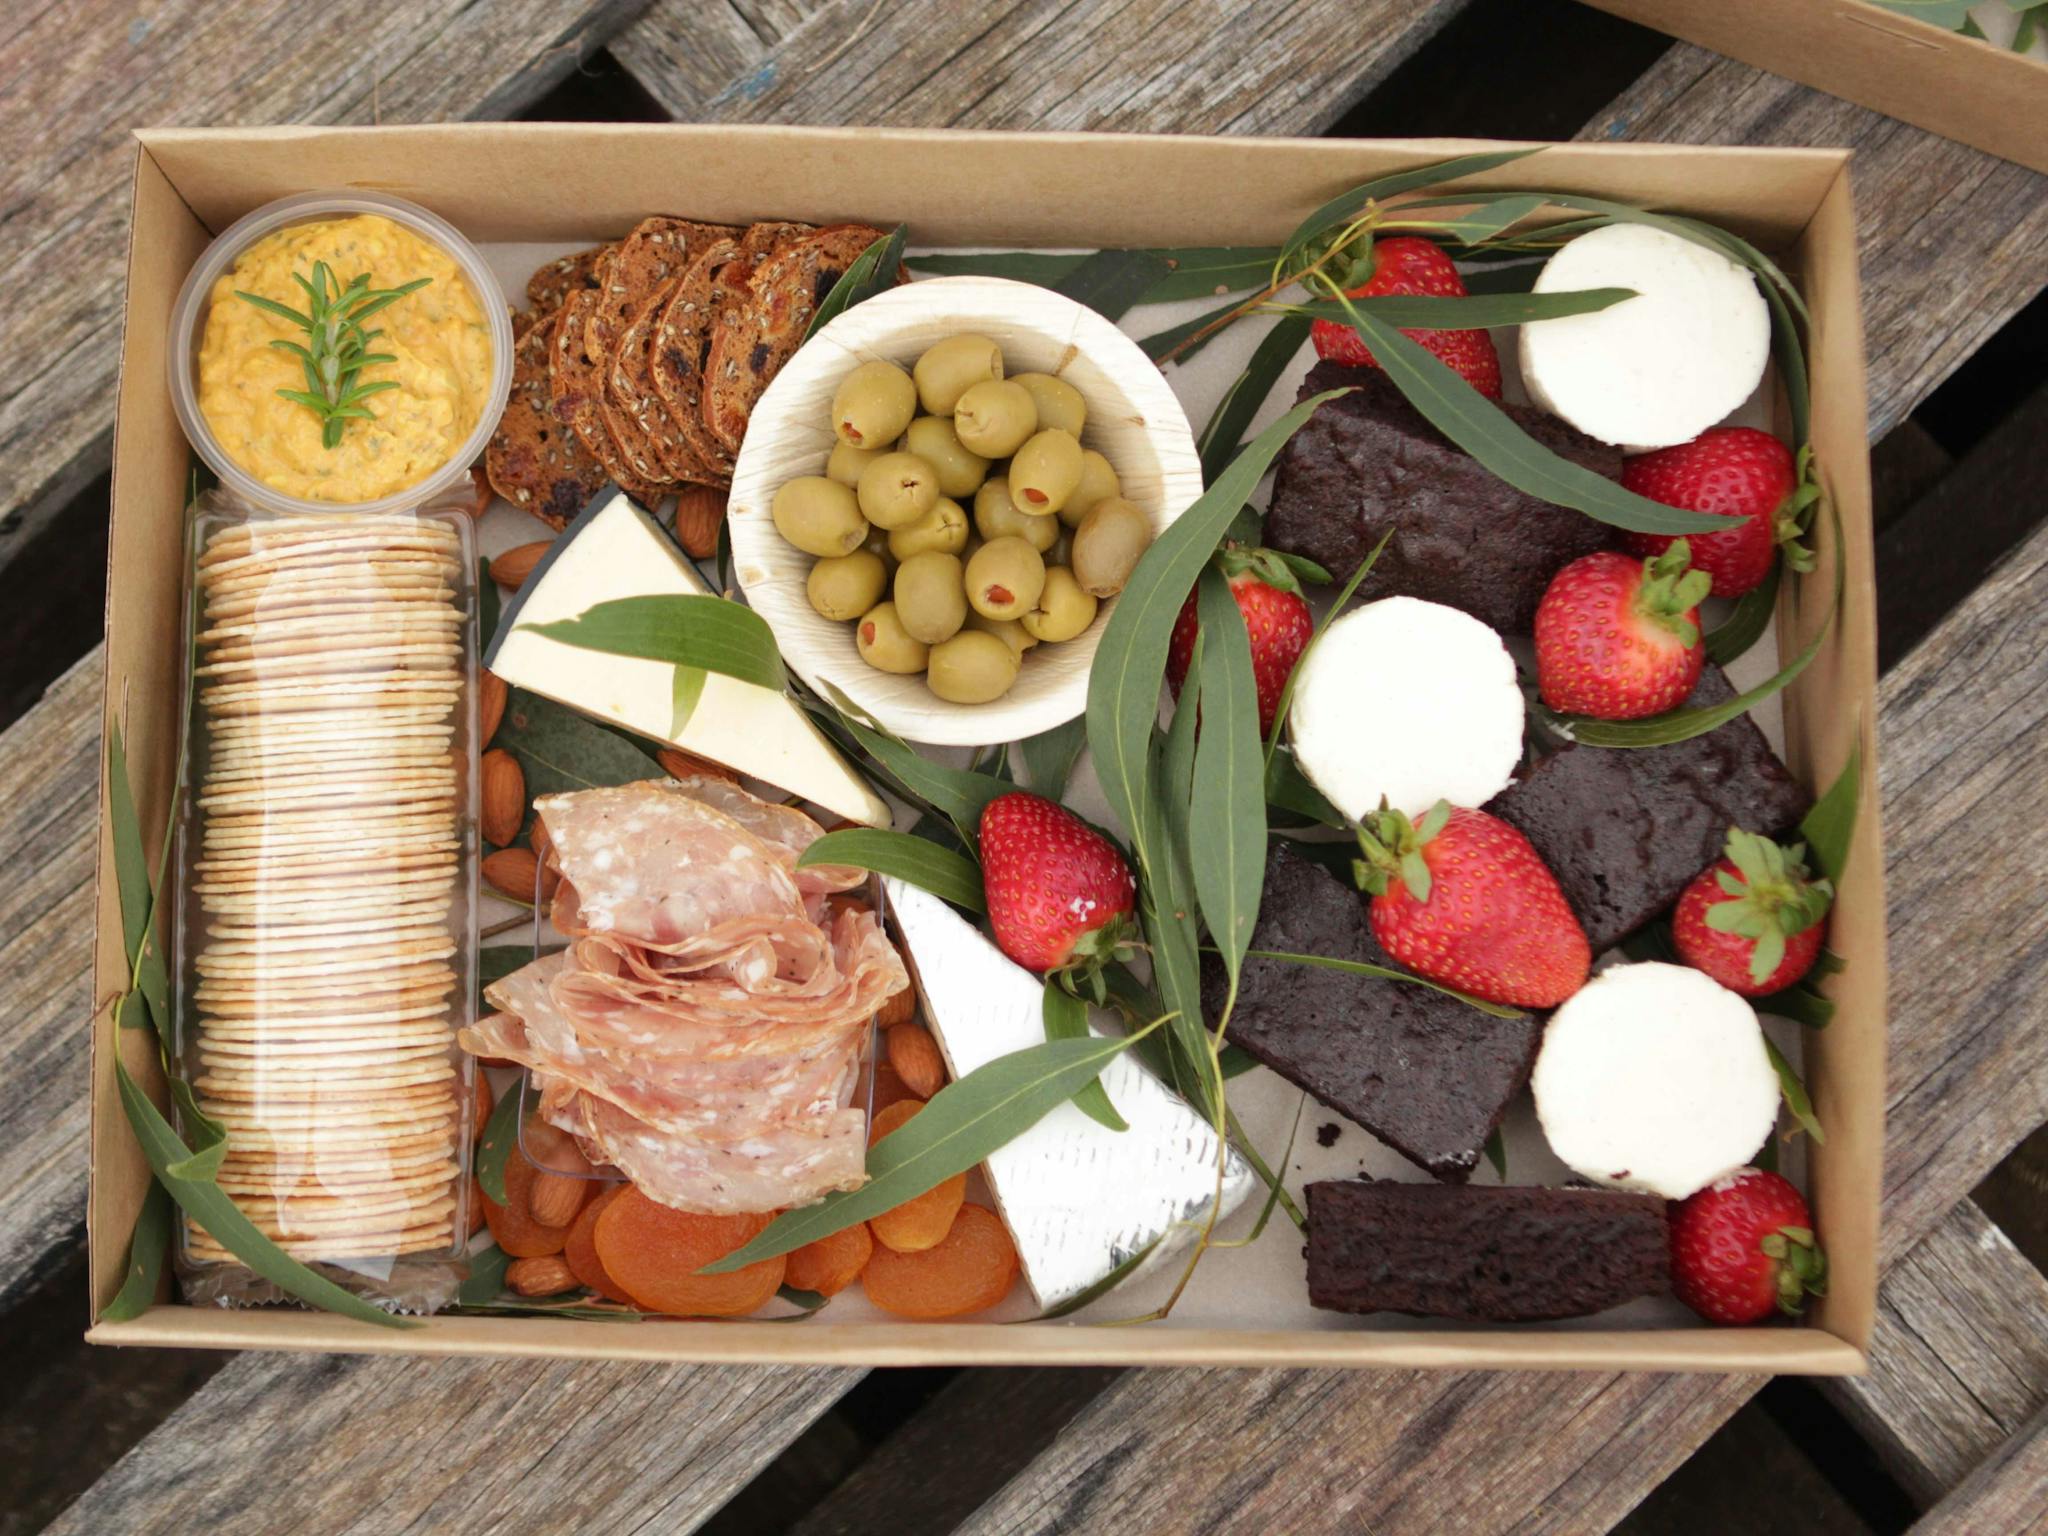 A platter box with sweet and savoury foods